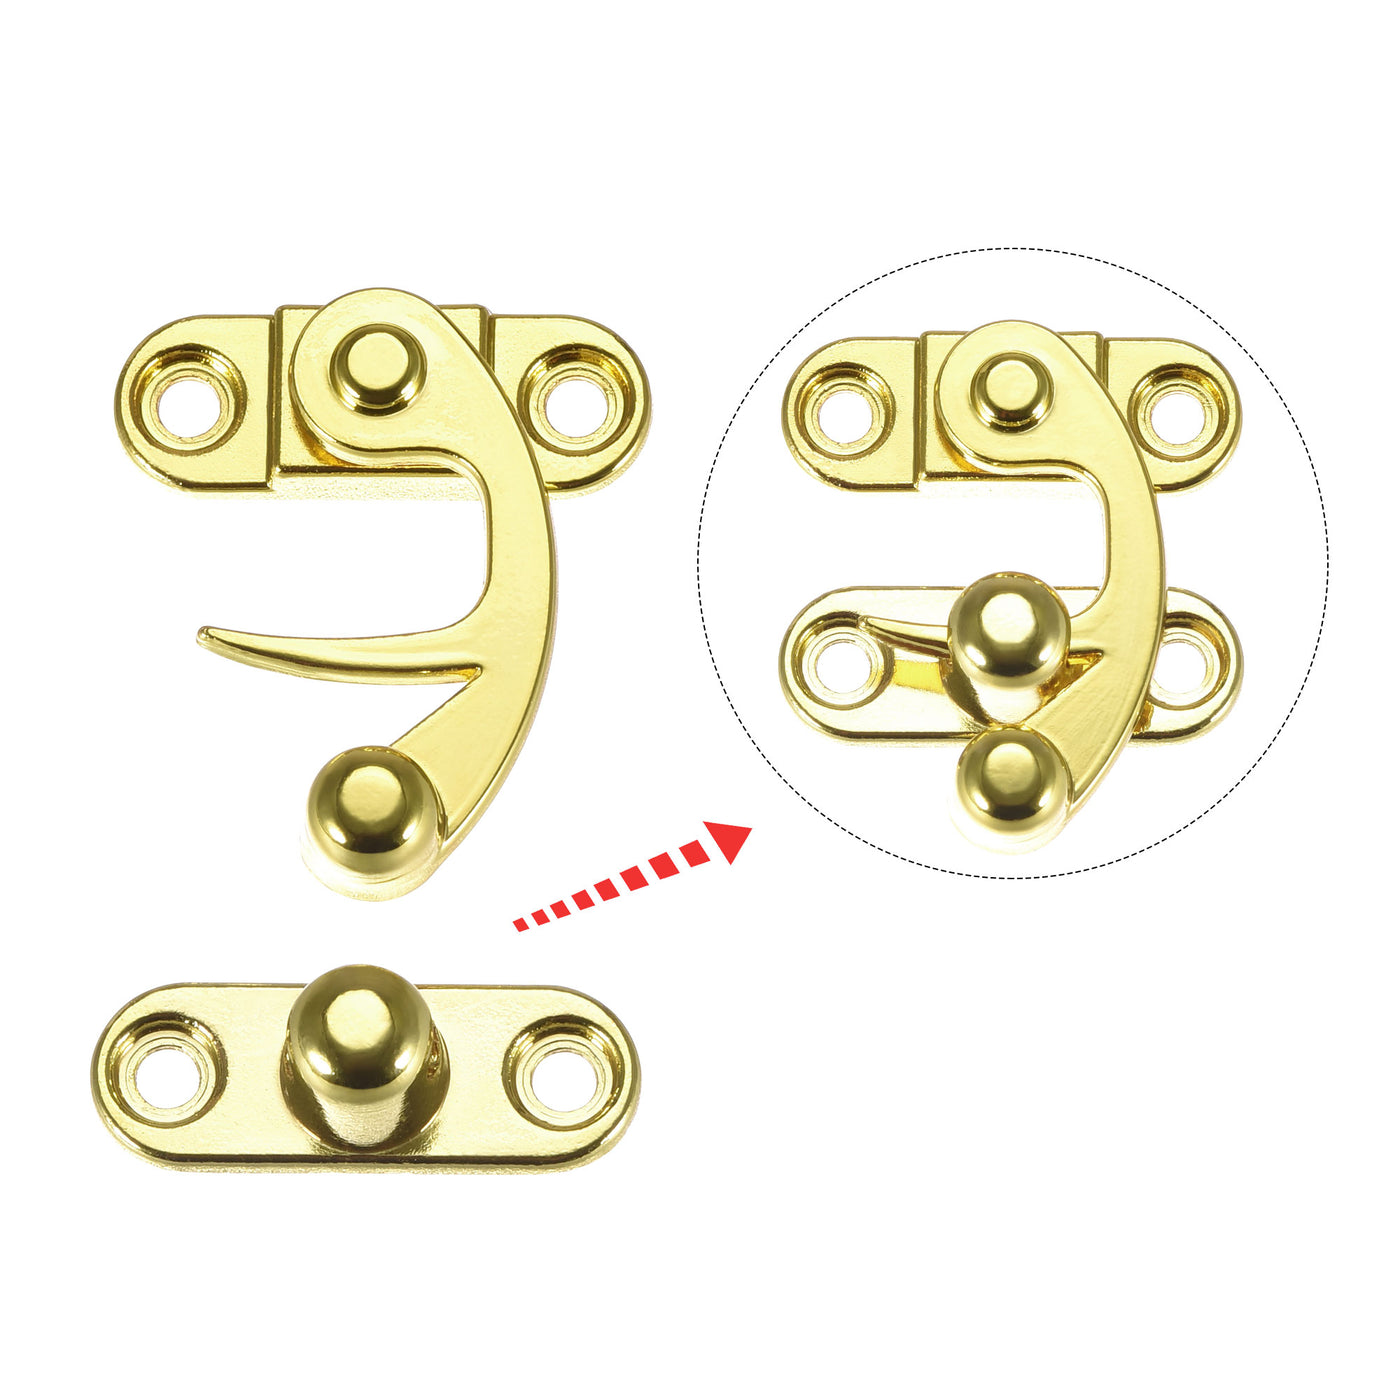 uxcell Uxcell Antique Vintage Lock Clasp Right Latch Hook Hasp 33mmx28mm Swing Arm Latch Gold Tone 2 Pcs